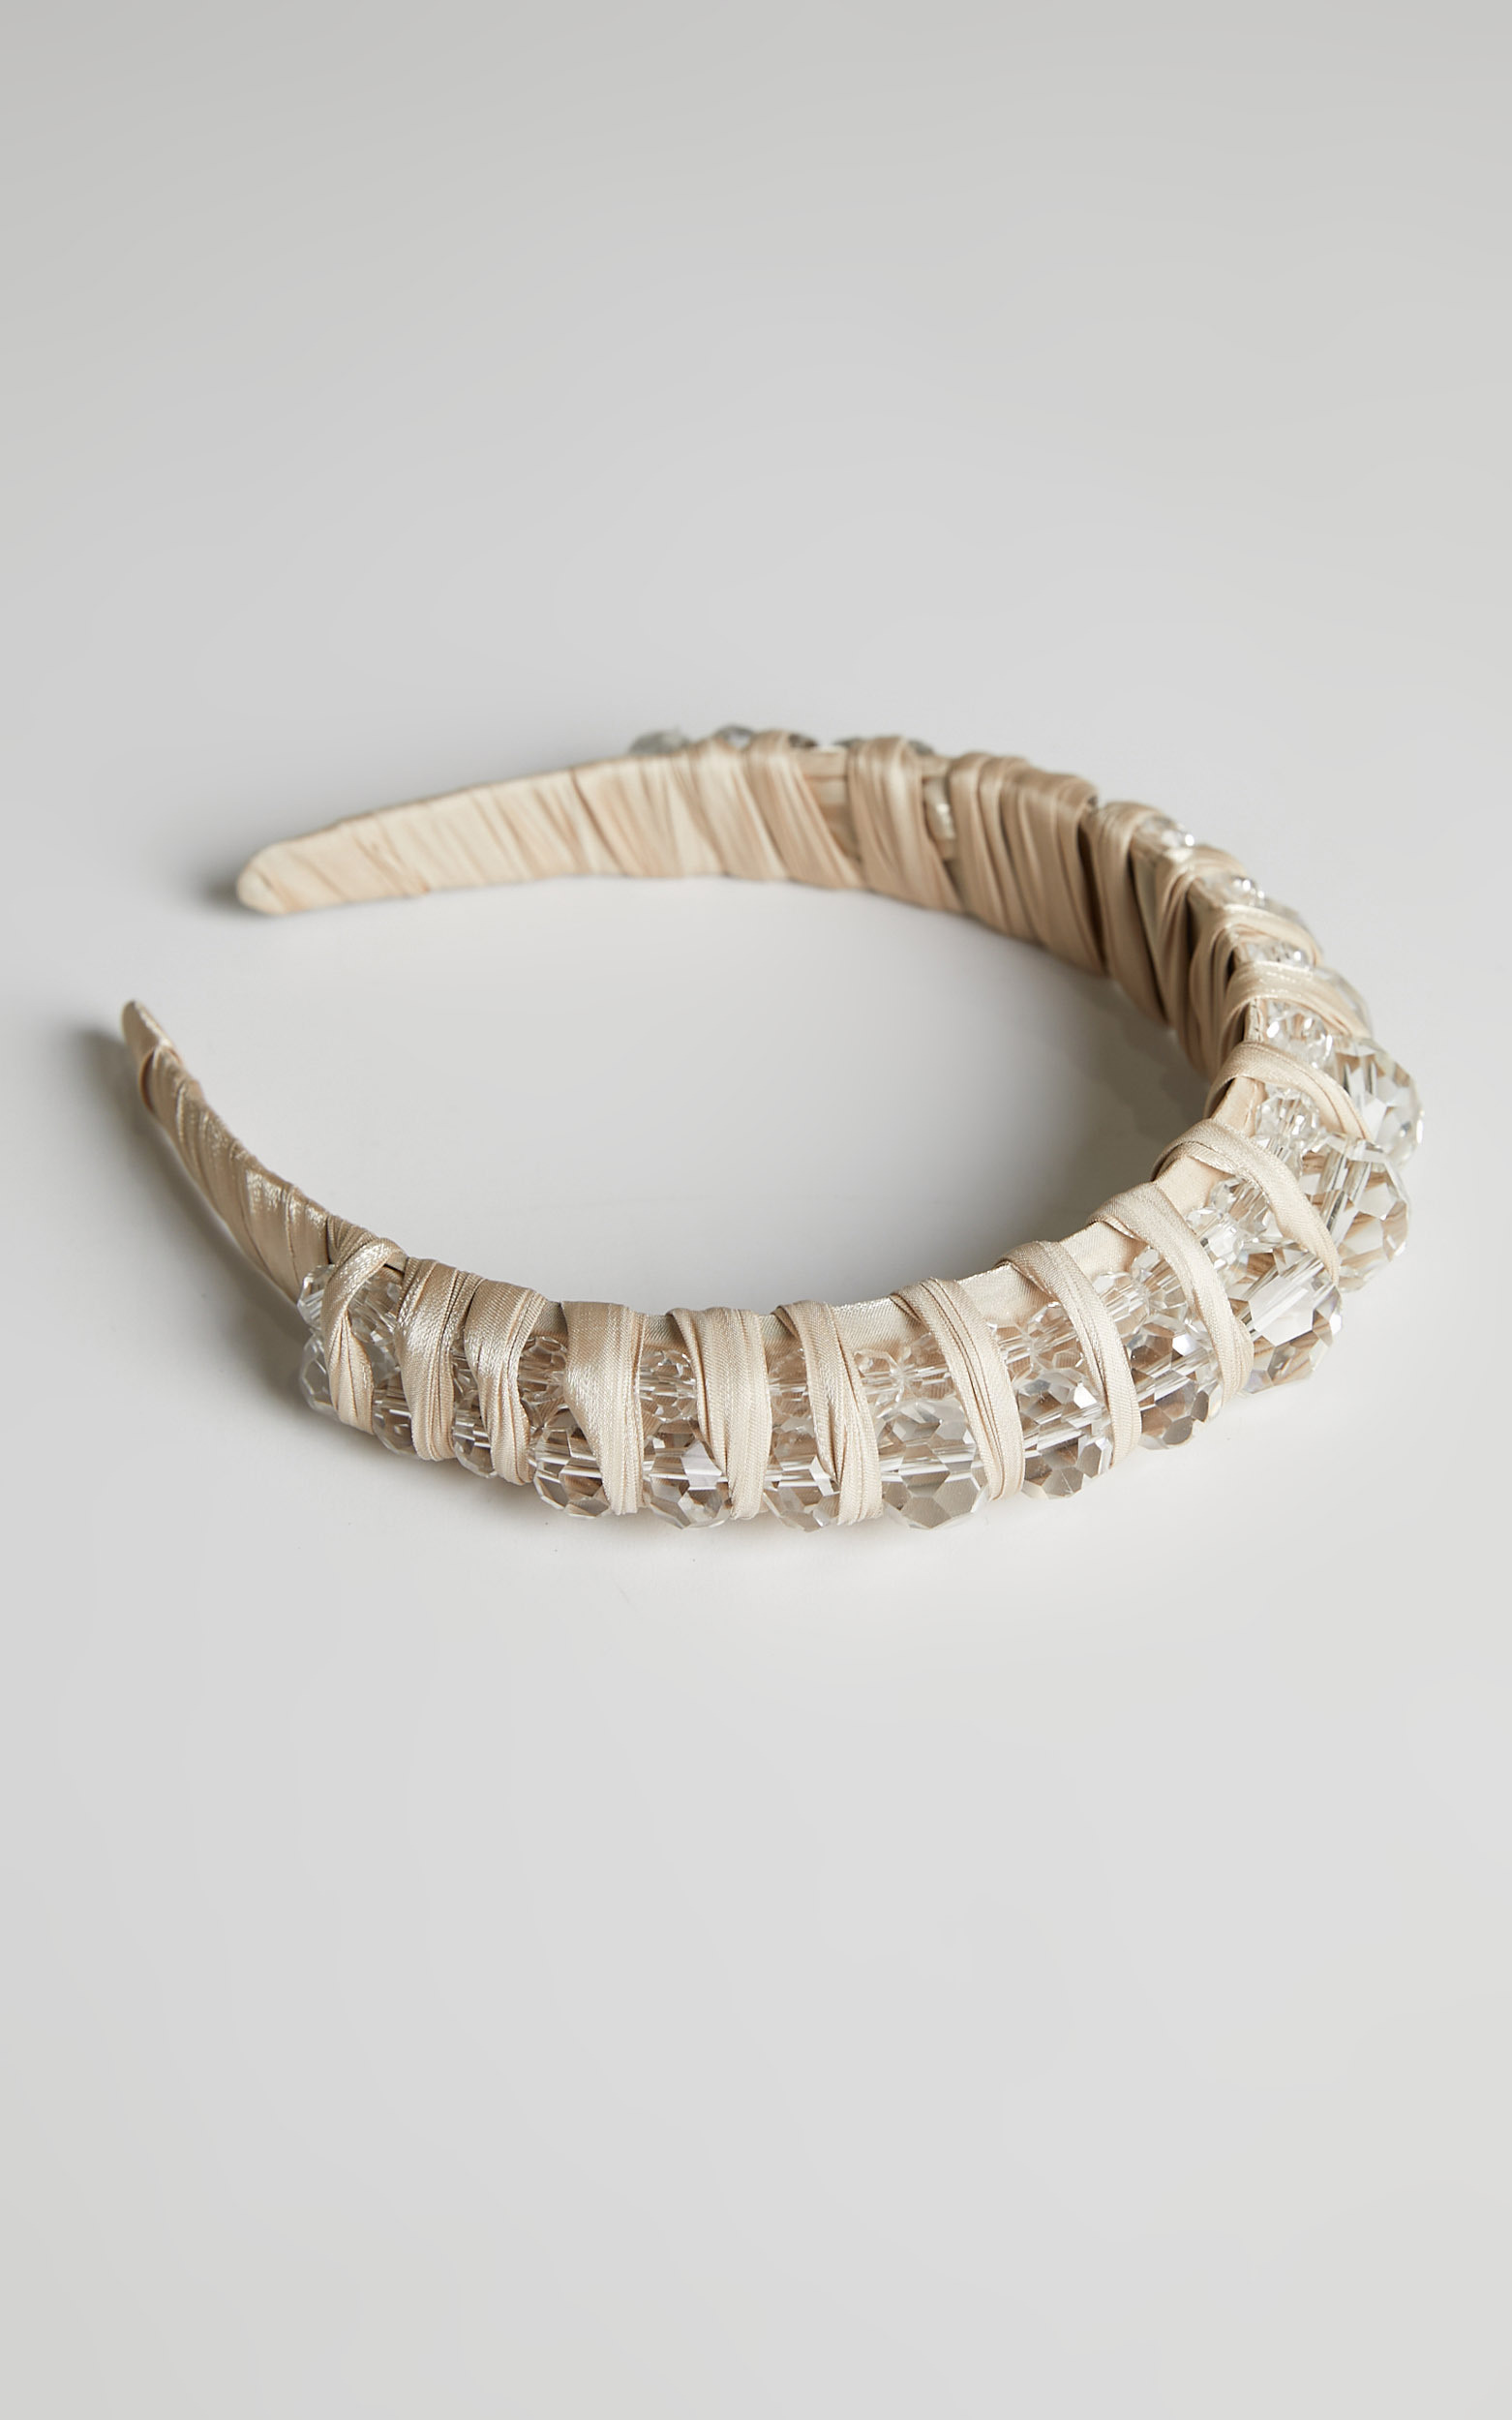 Persia Embellished Headband in White - NoSize, WHT2, hi-res image number null